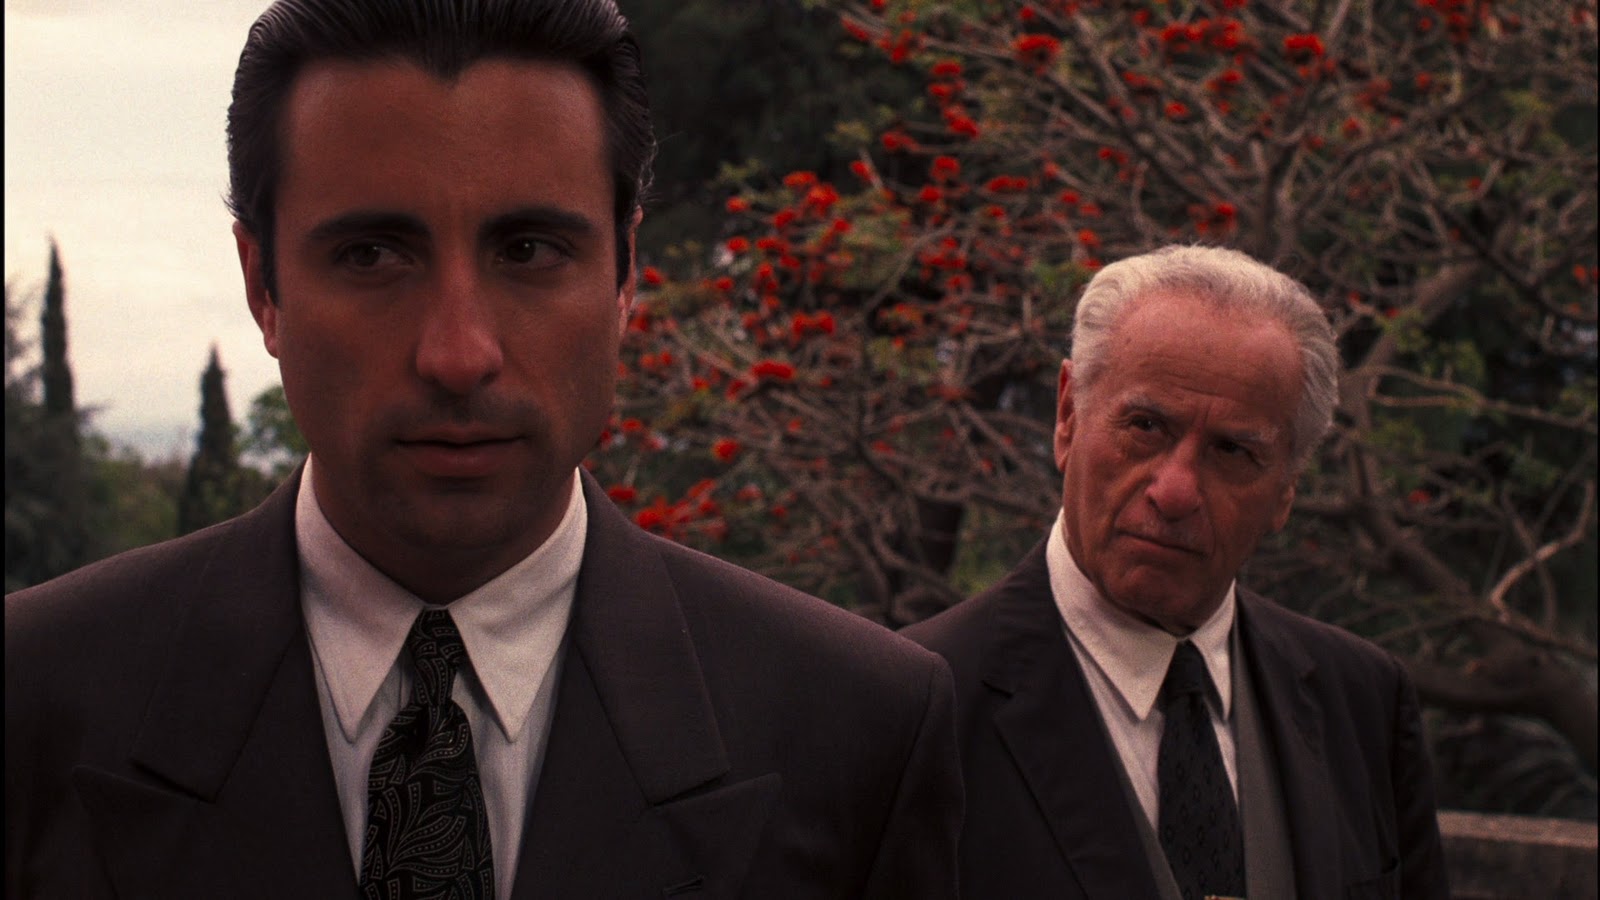 The Ace Black Movie Blog: Movie Review: The Godfather Part III (1990)